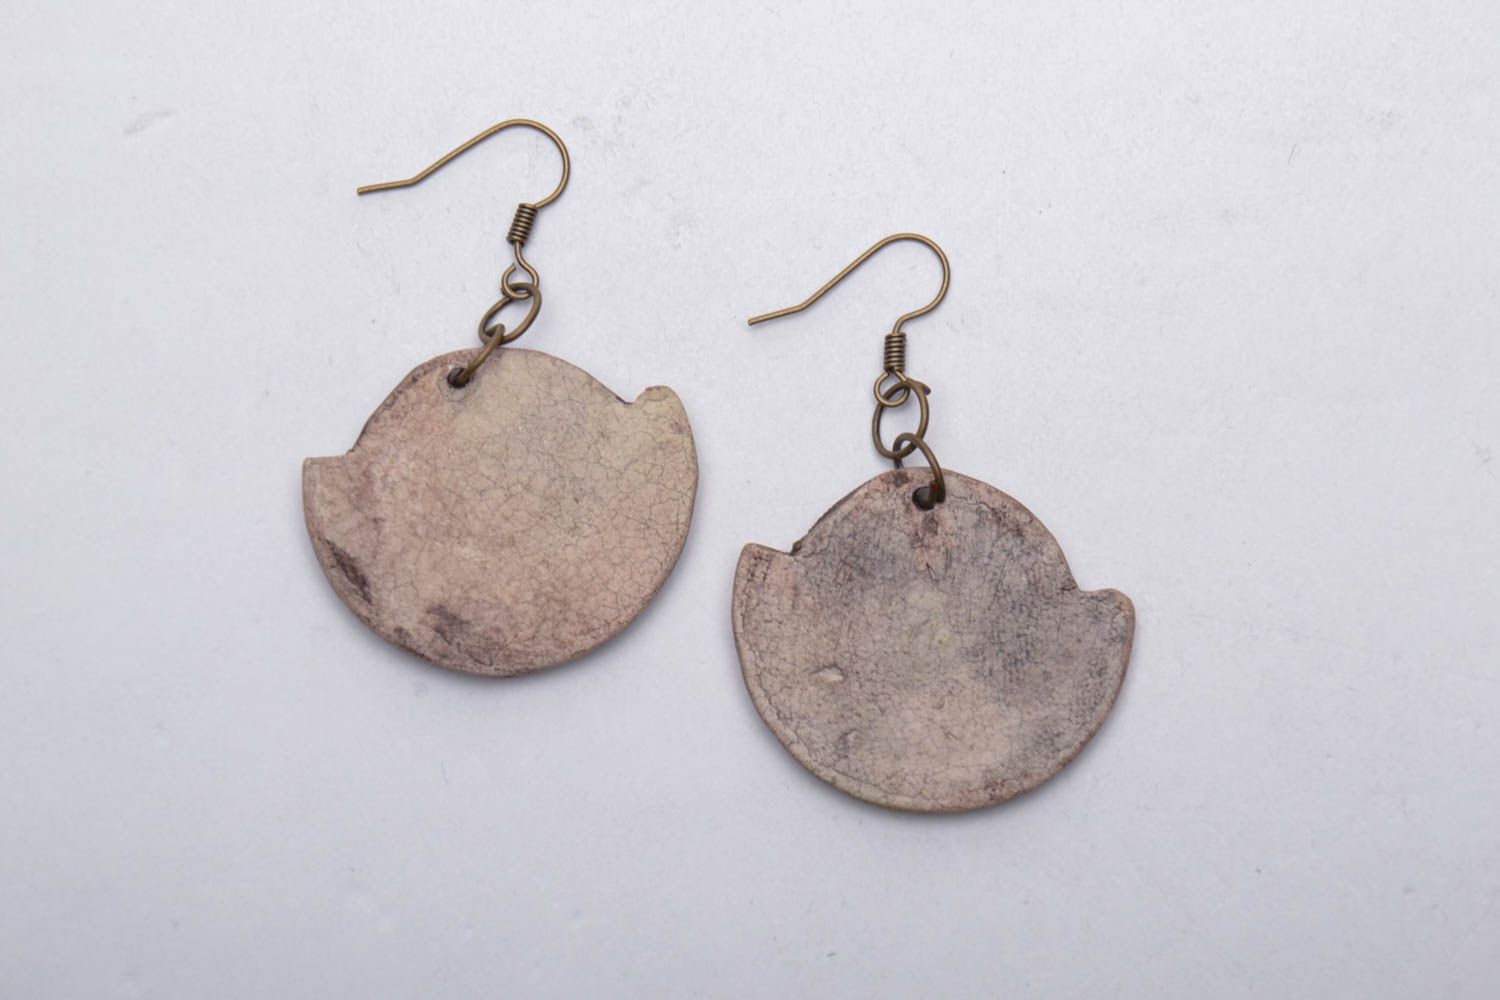 Ceramic earrings with charms photo 5